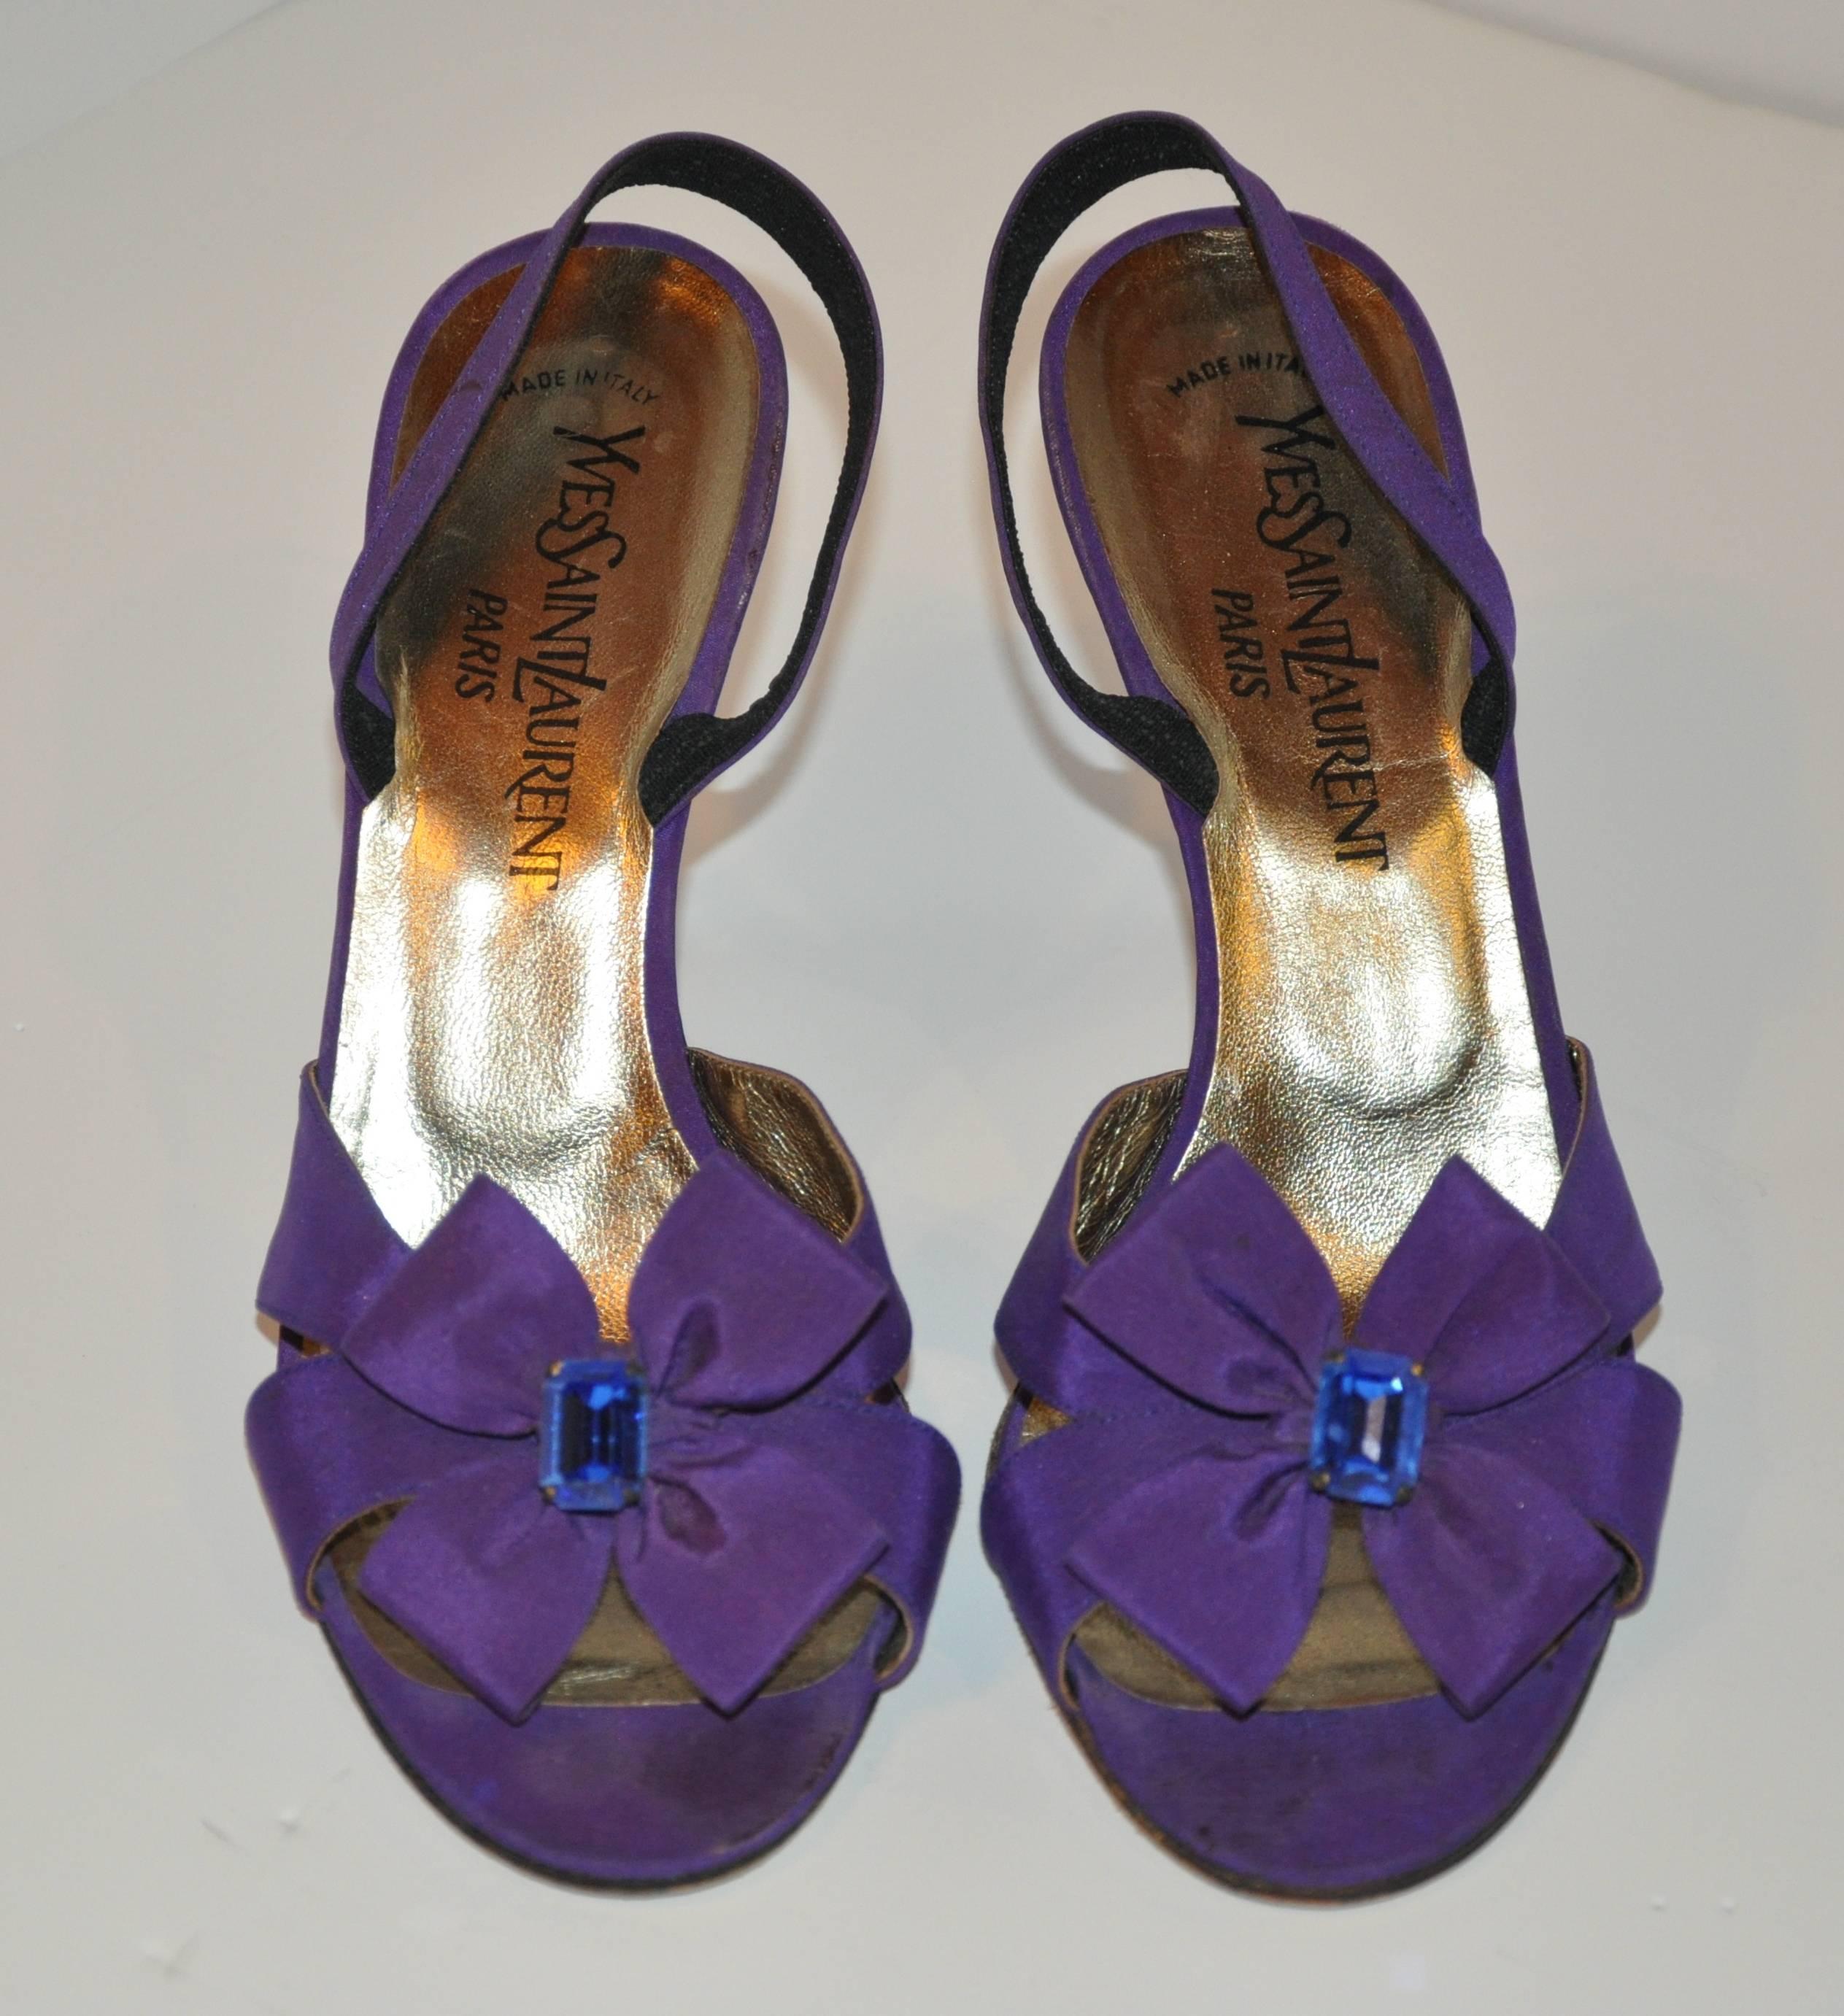 Yves Saint Laurent wonderfully elegant and timeless sling-back evening sandal is one of the most perfect shape for a lady with great legs to show! The interior of the back strap is reinforce to help 